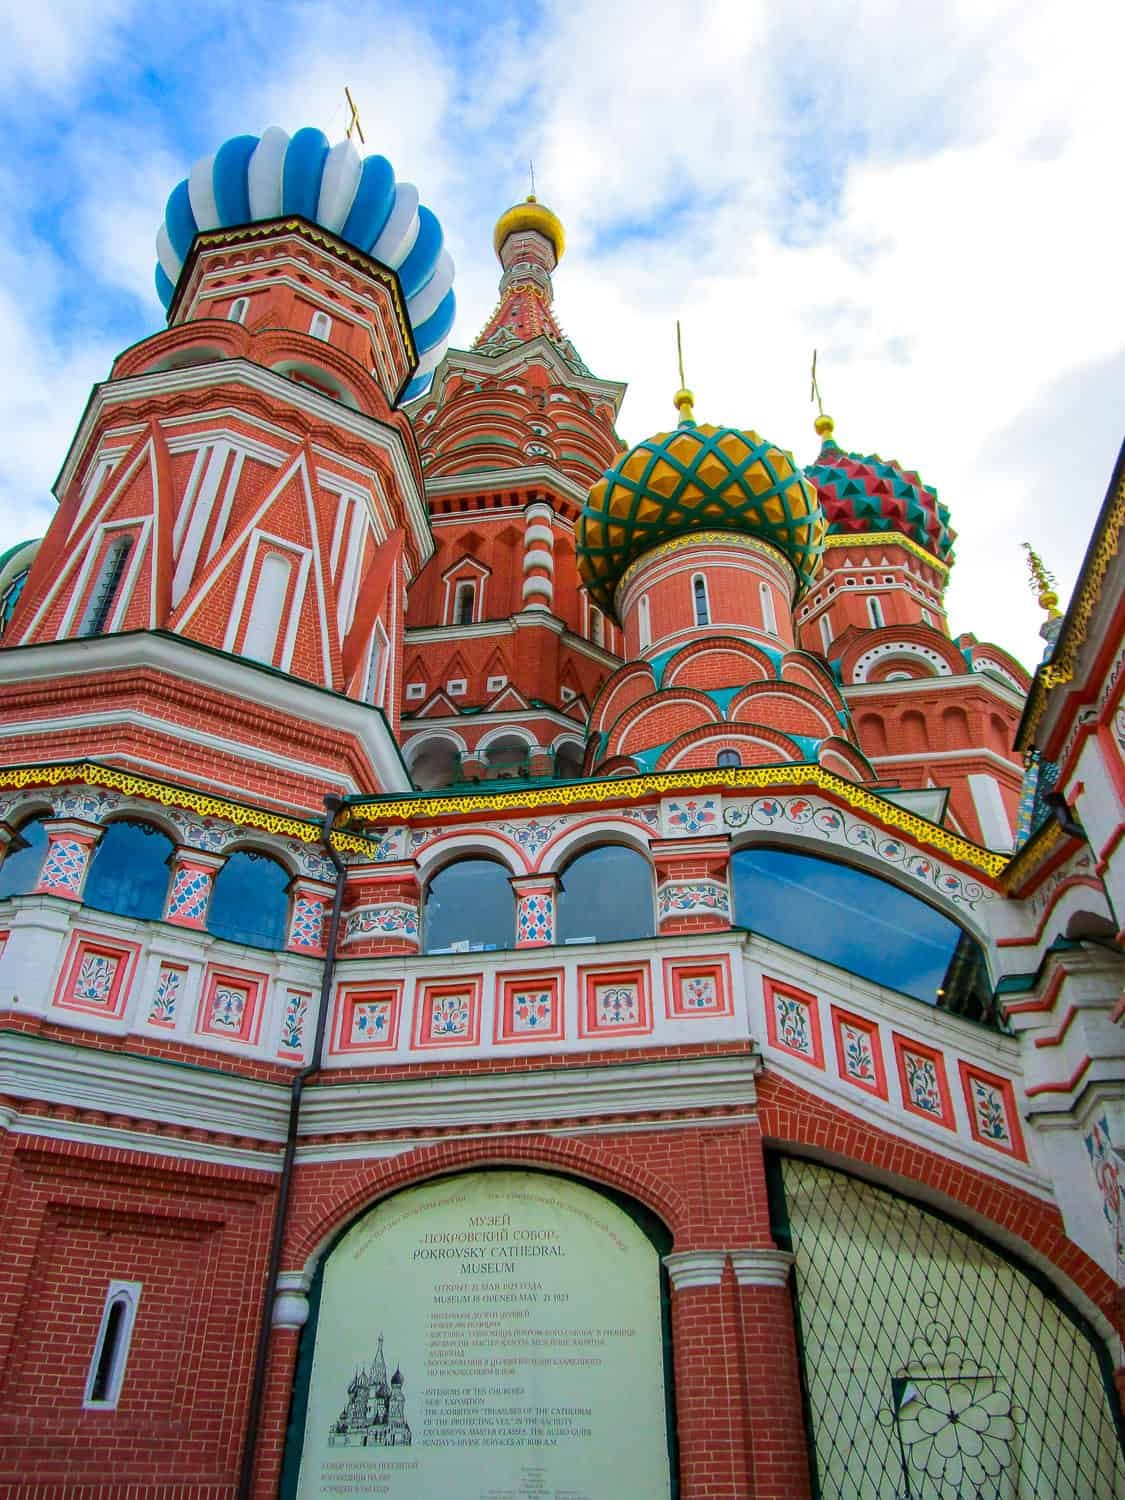 The Awe Inspiring St. Basil’s Cathedral